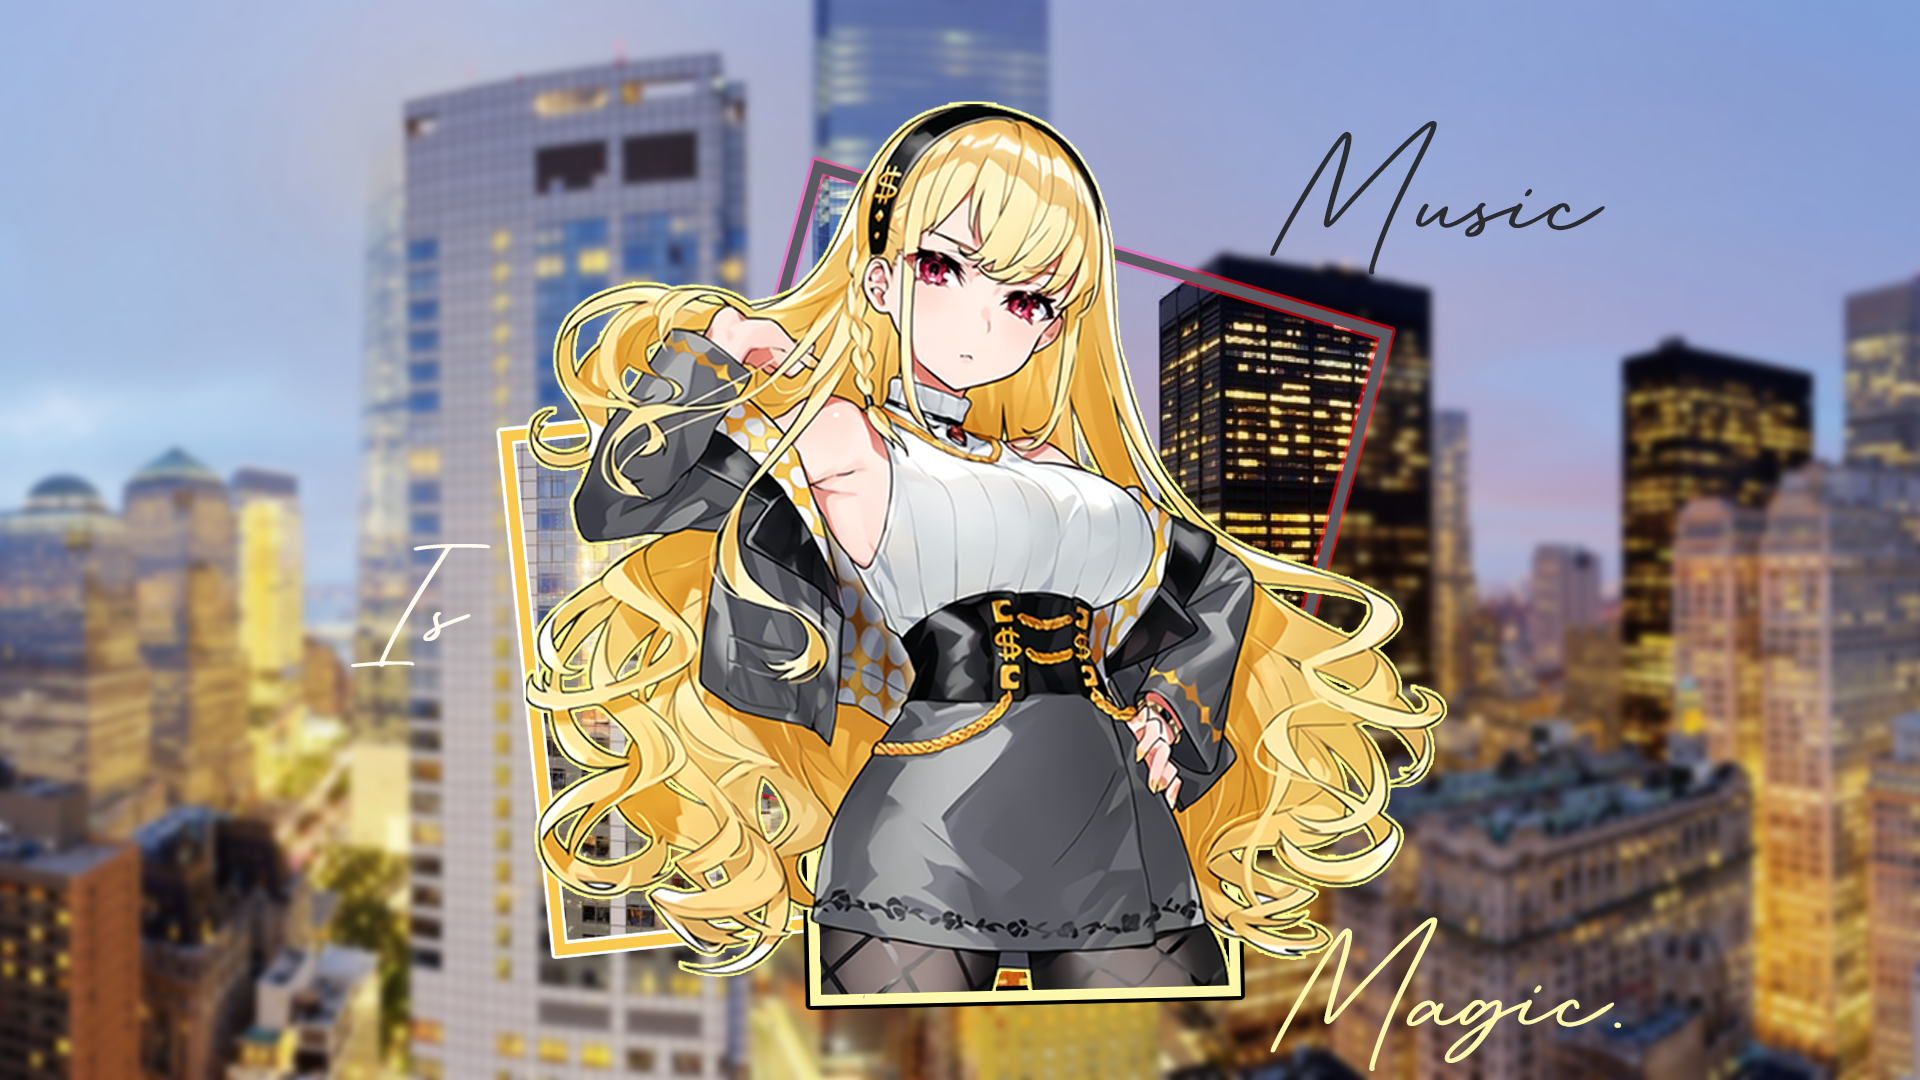 Anime 1920x1080 city Denonbu picture-in-picture anime girls